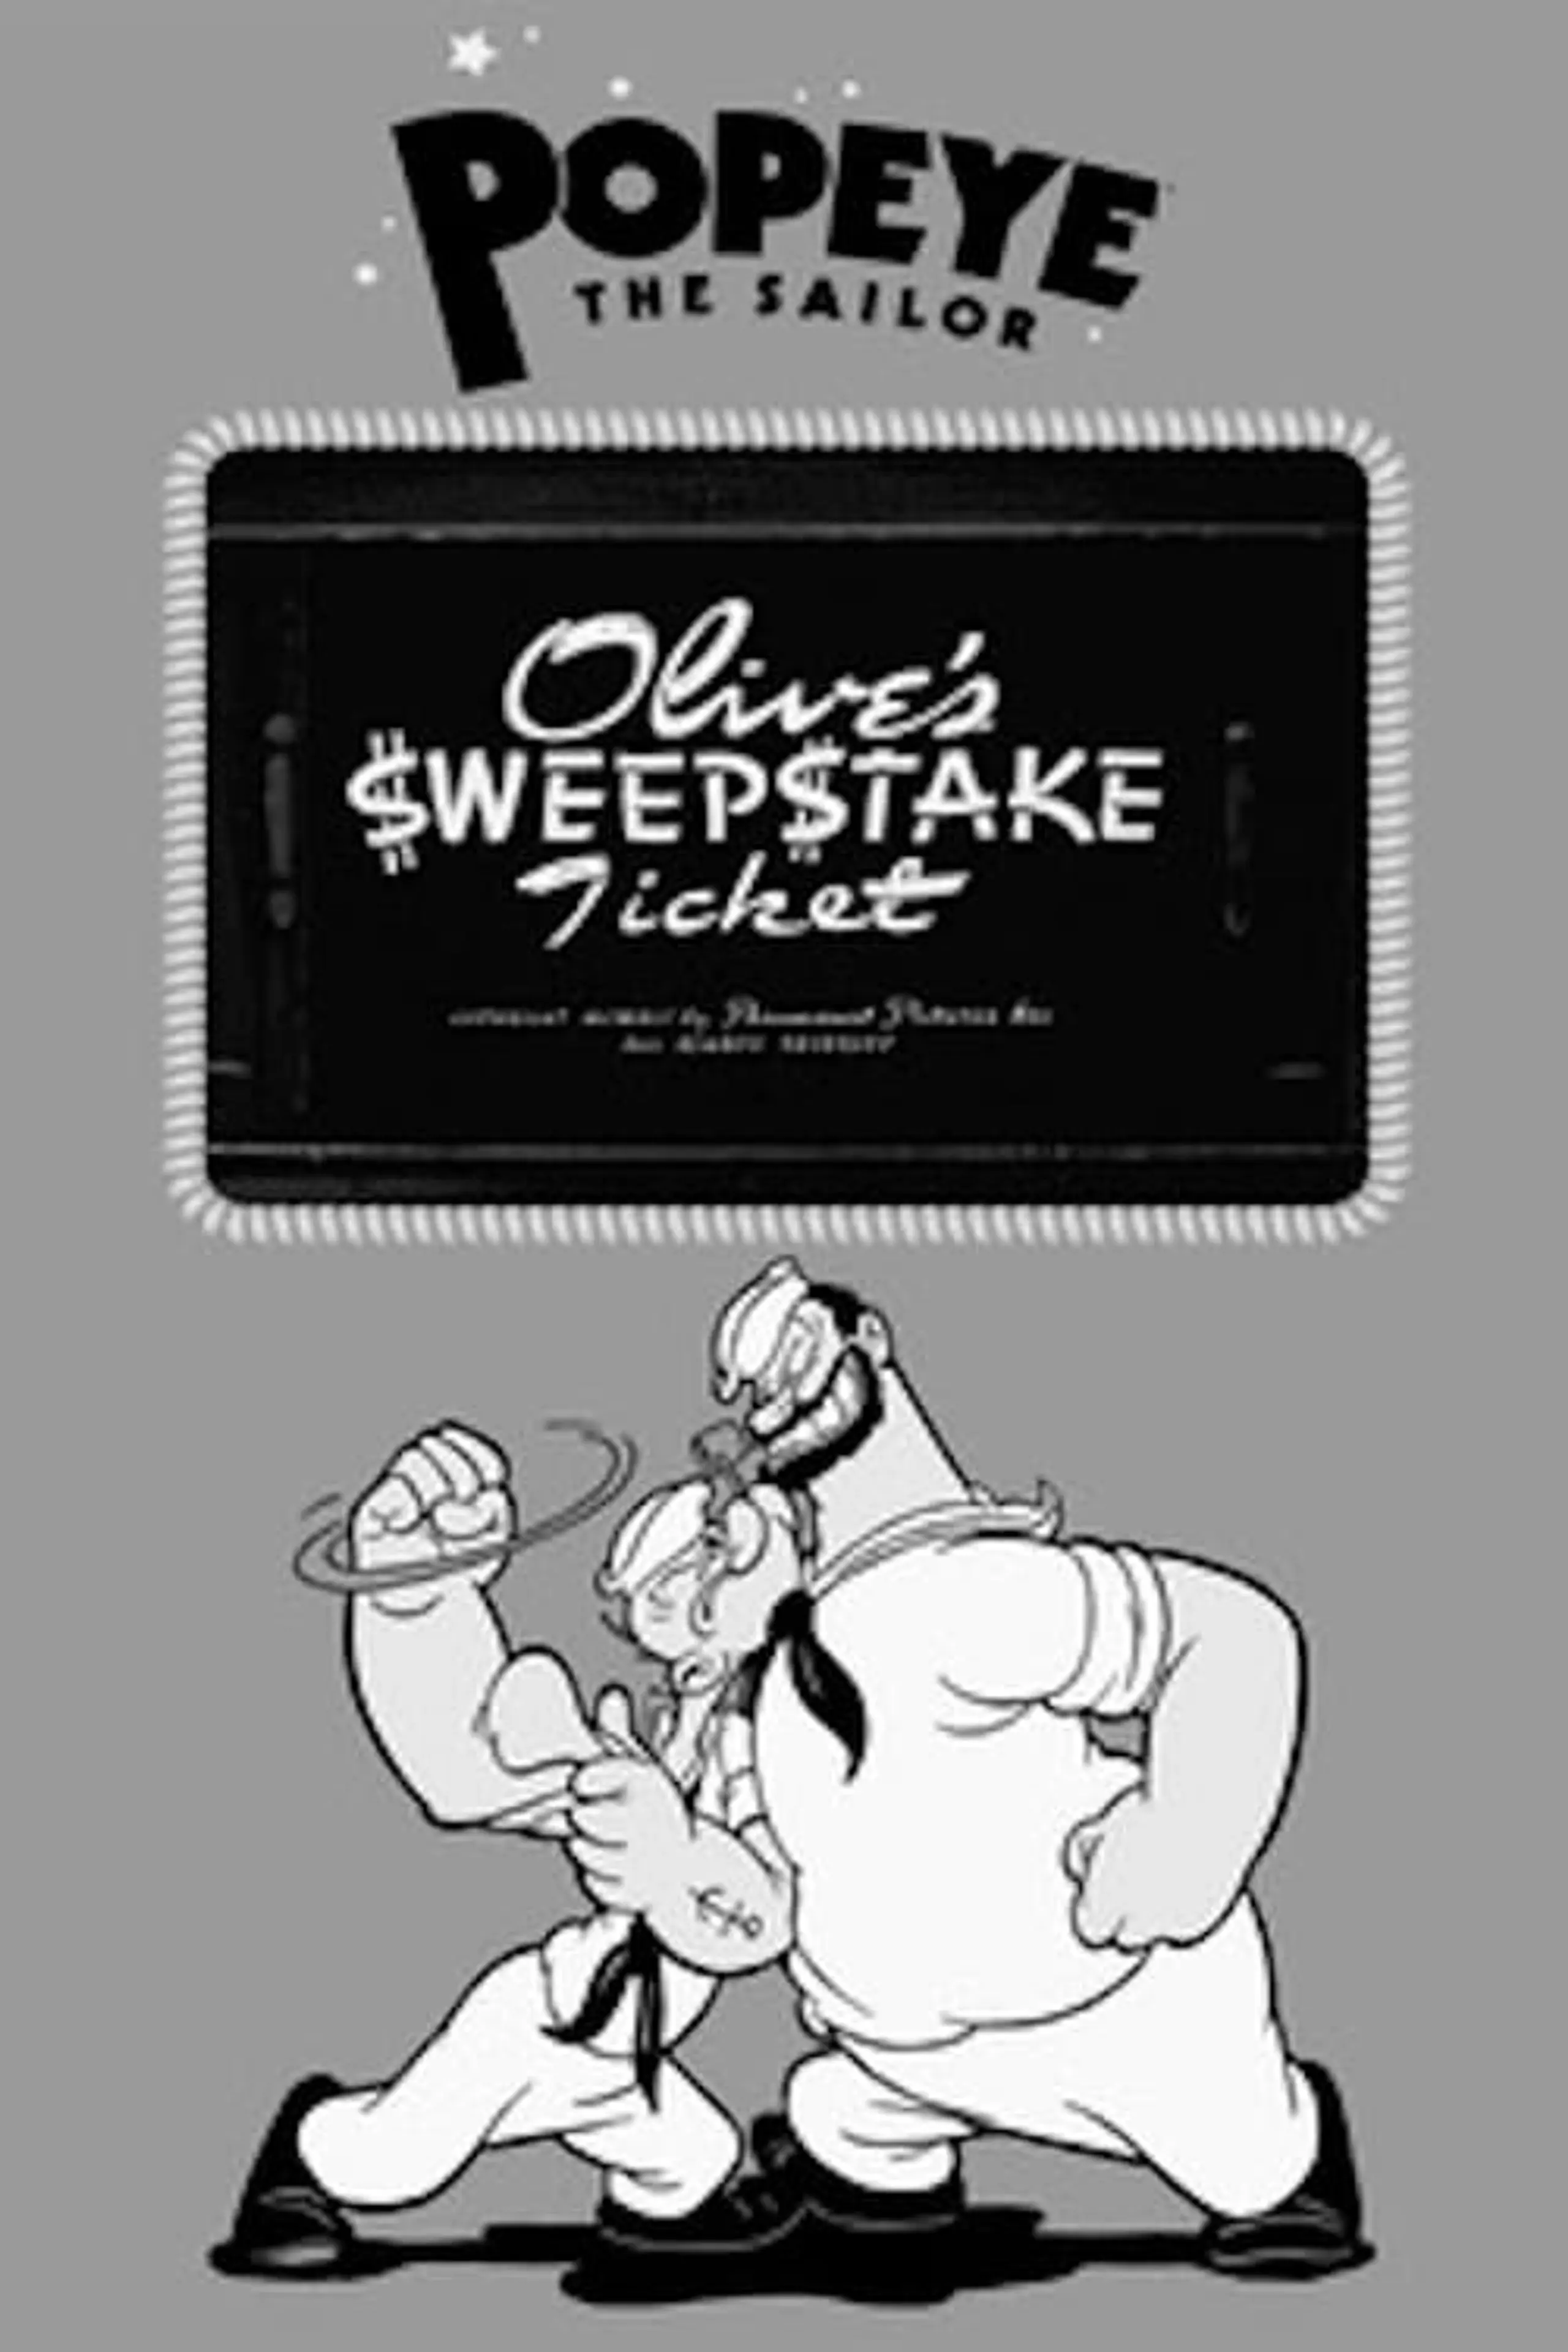 Olive's $weep$take Ticket